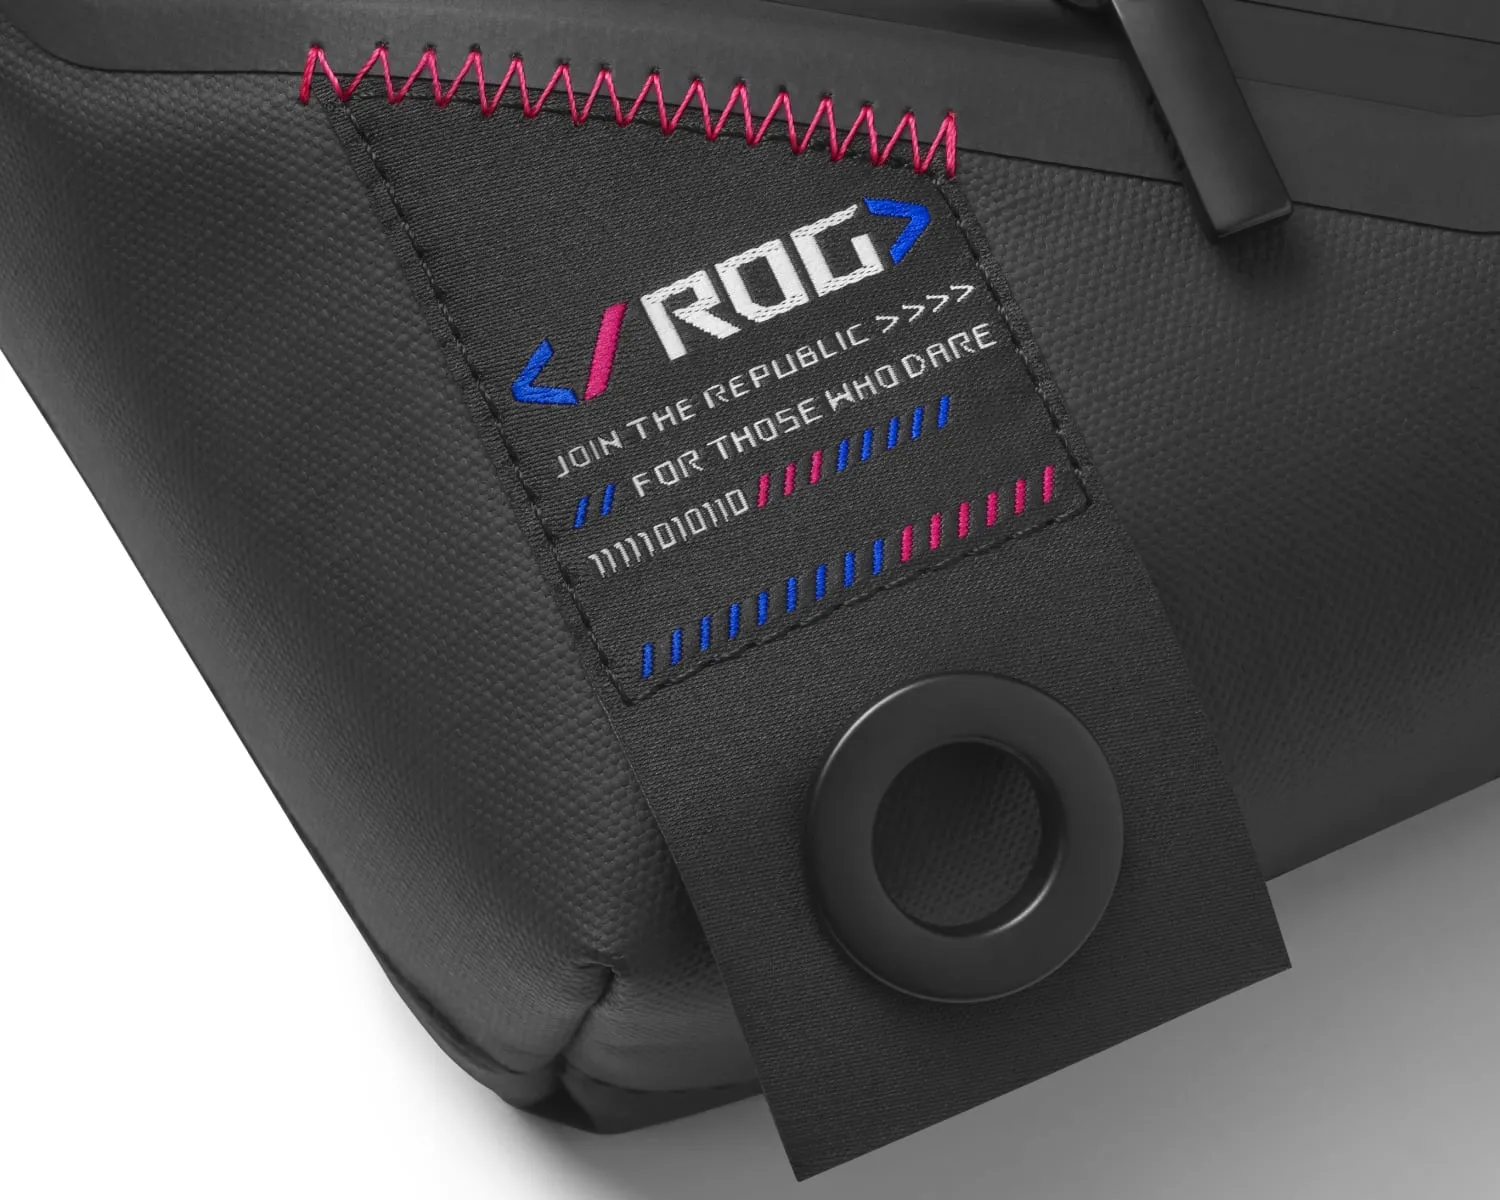 Extreme close-up of the patch on the ROG SLASH Sling Bag 2.0